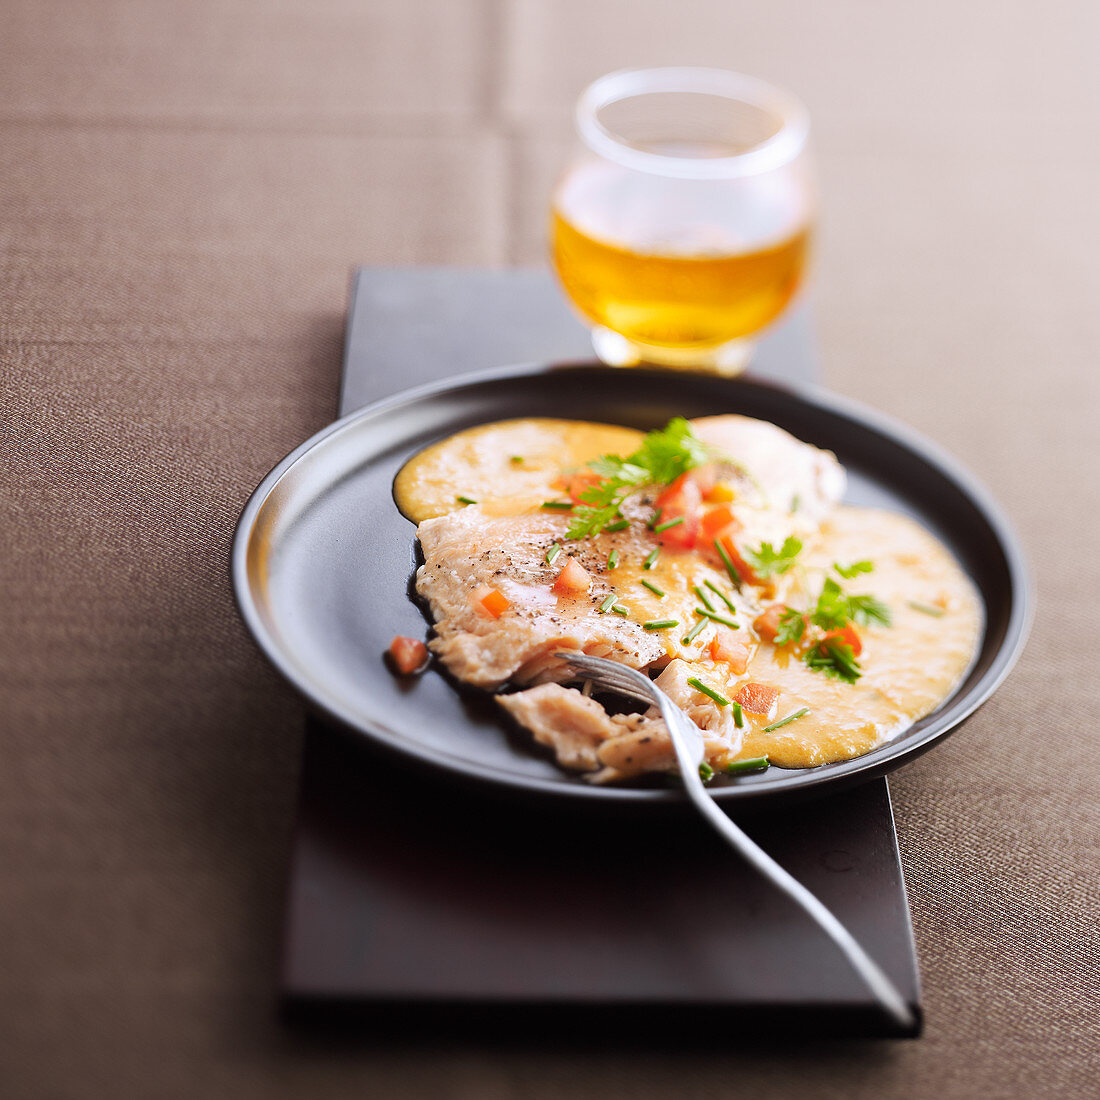 Salmon escalope with cider sauce